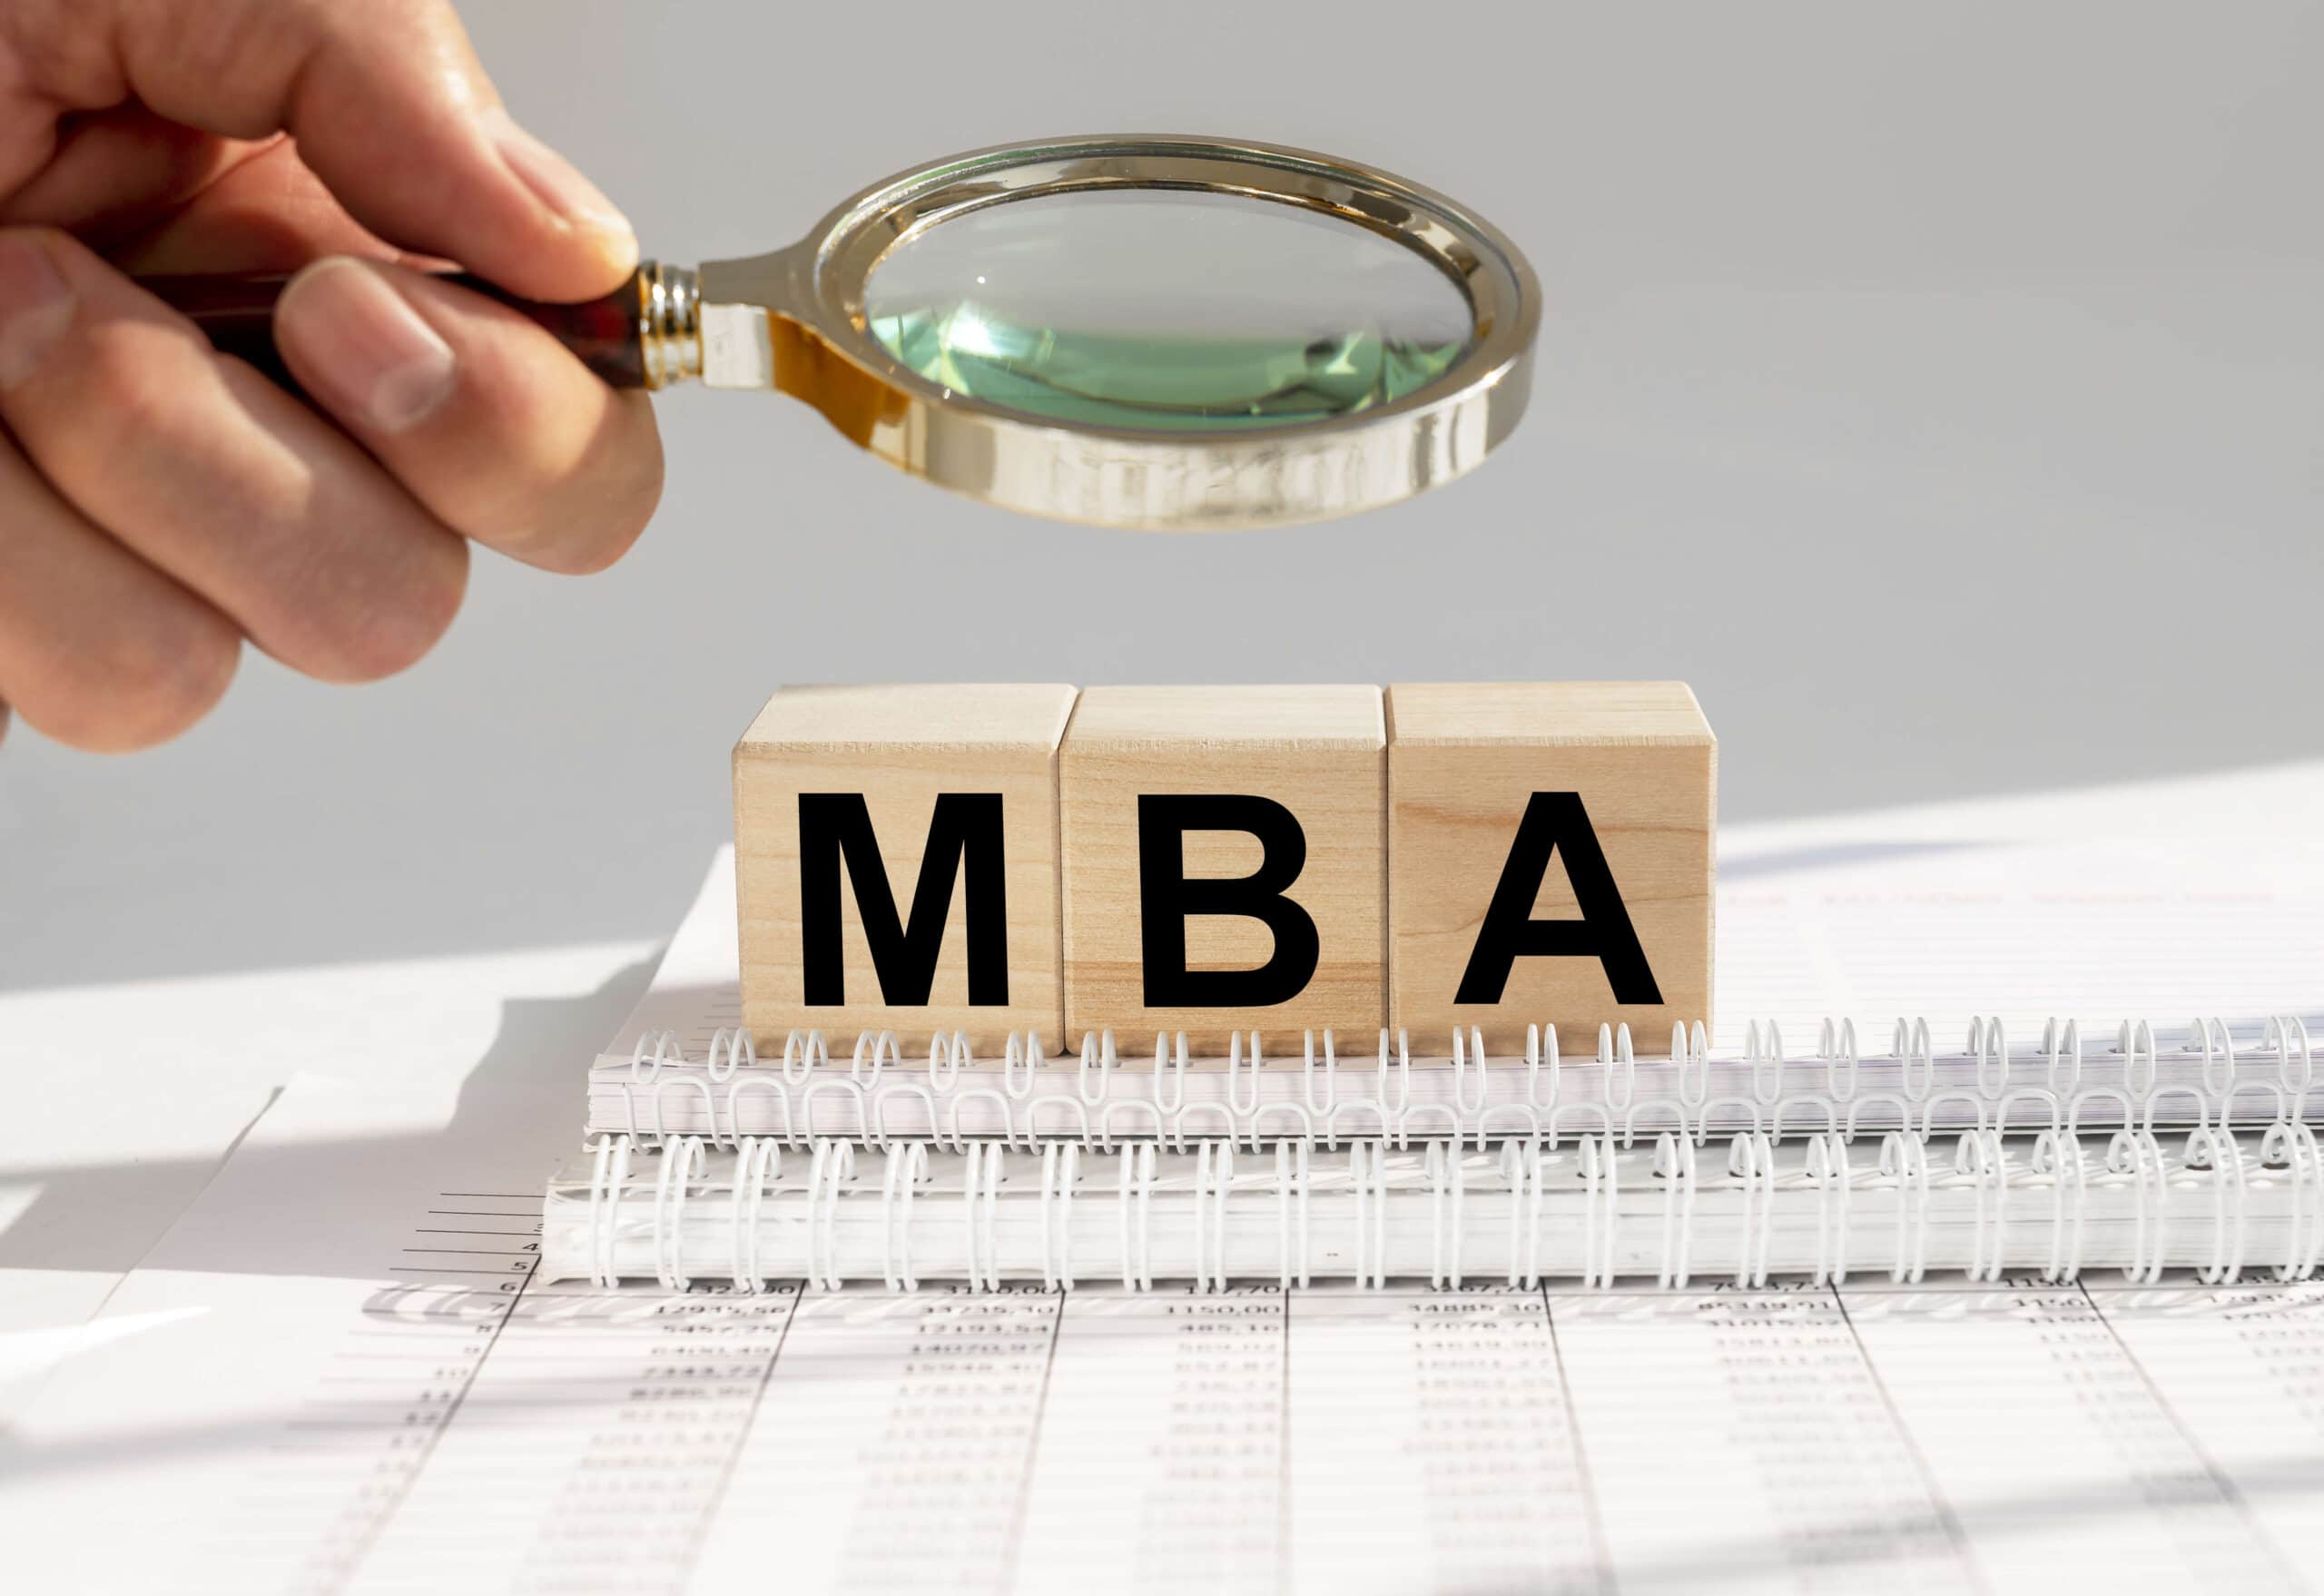 A magnifying glass over wooden blocks of the letters "MBA"